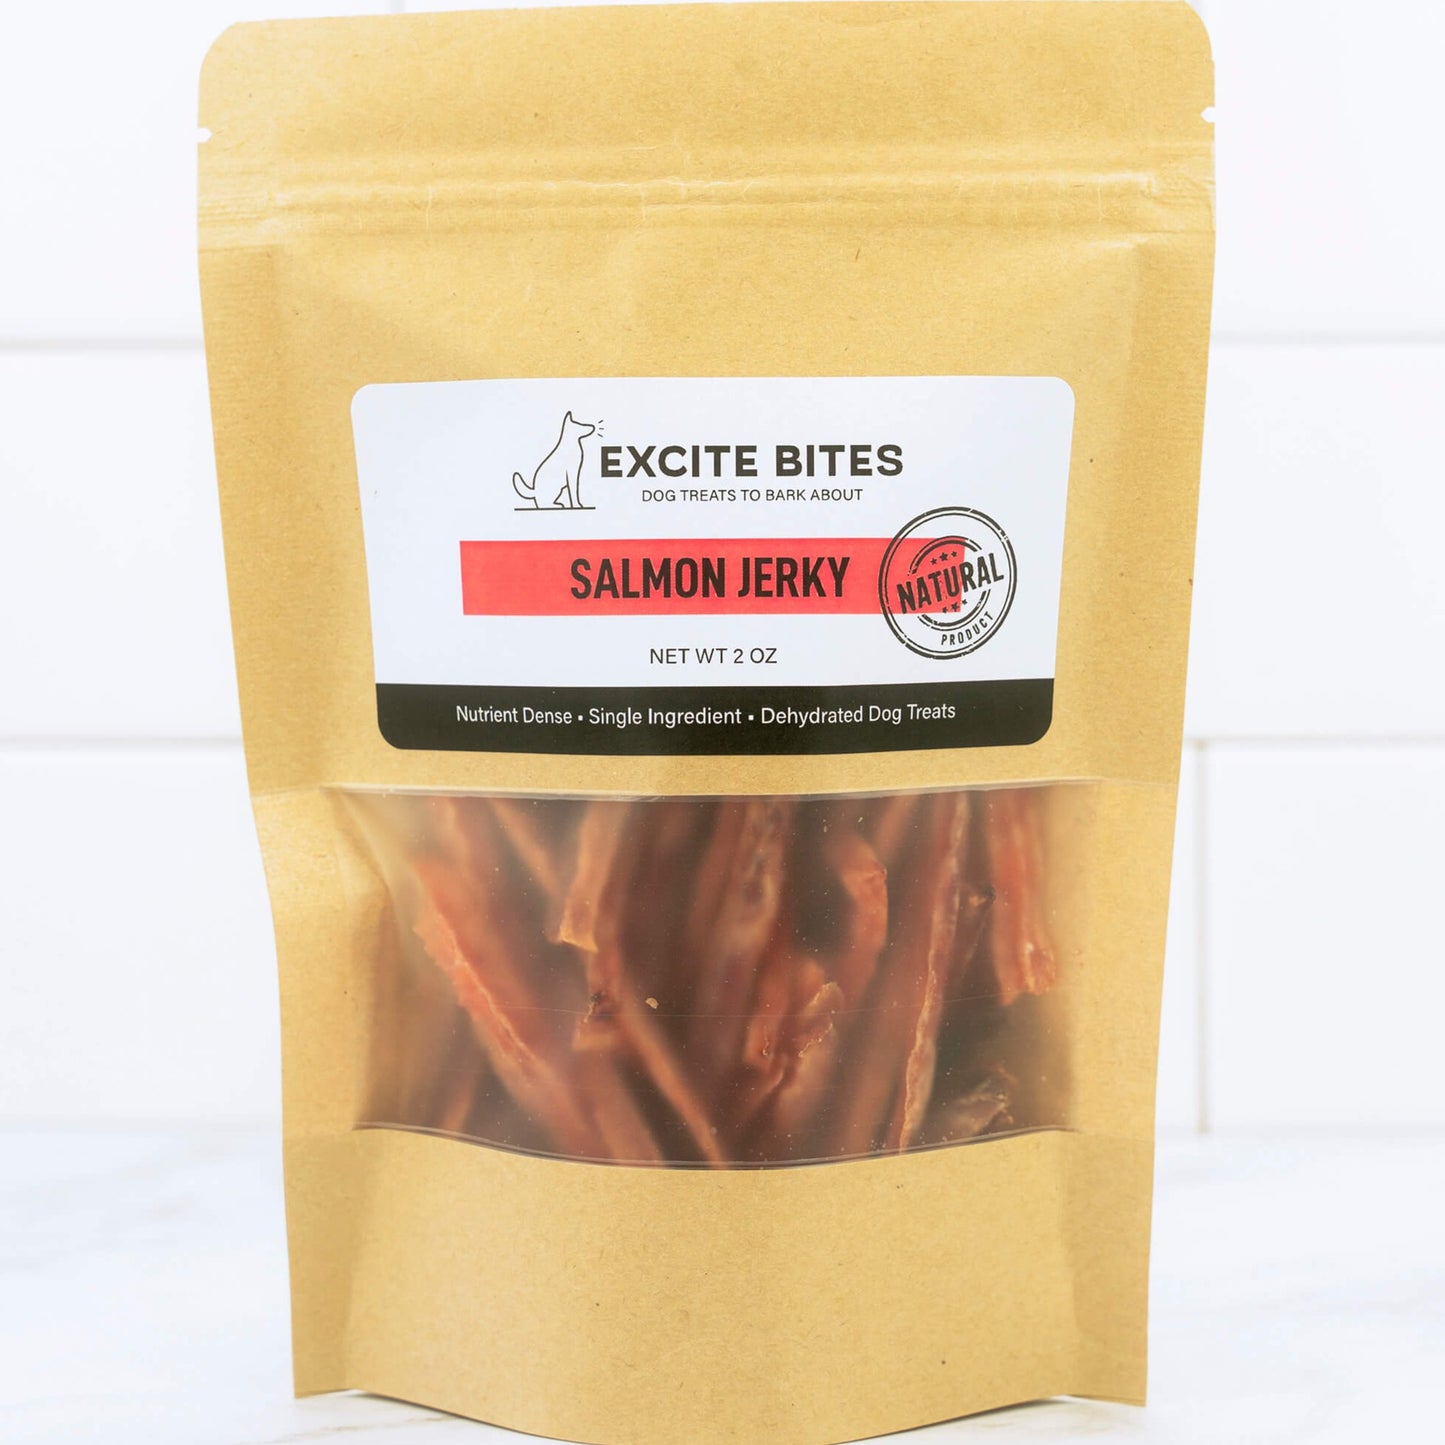 Salmon Jerky Excite Bites packaging